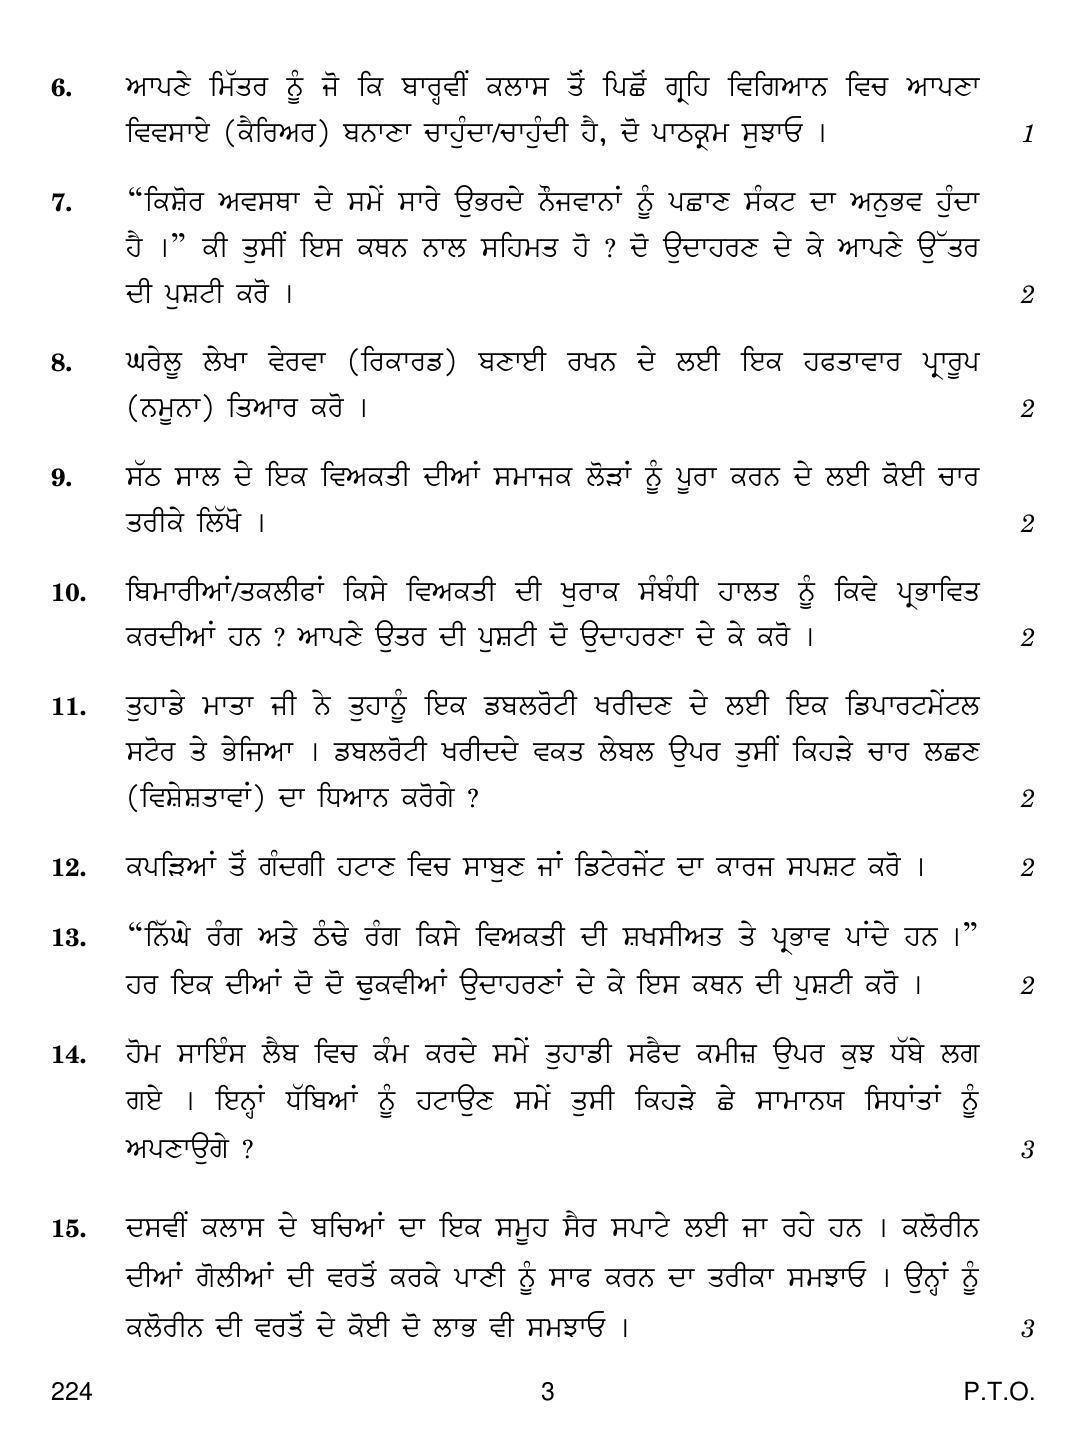 CBSE Class 12 224 HOME SCIENCE PUNJABI VERSION 2018 Question Paper - Page 3